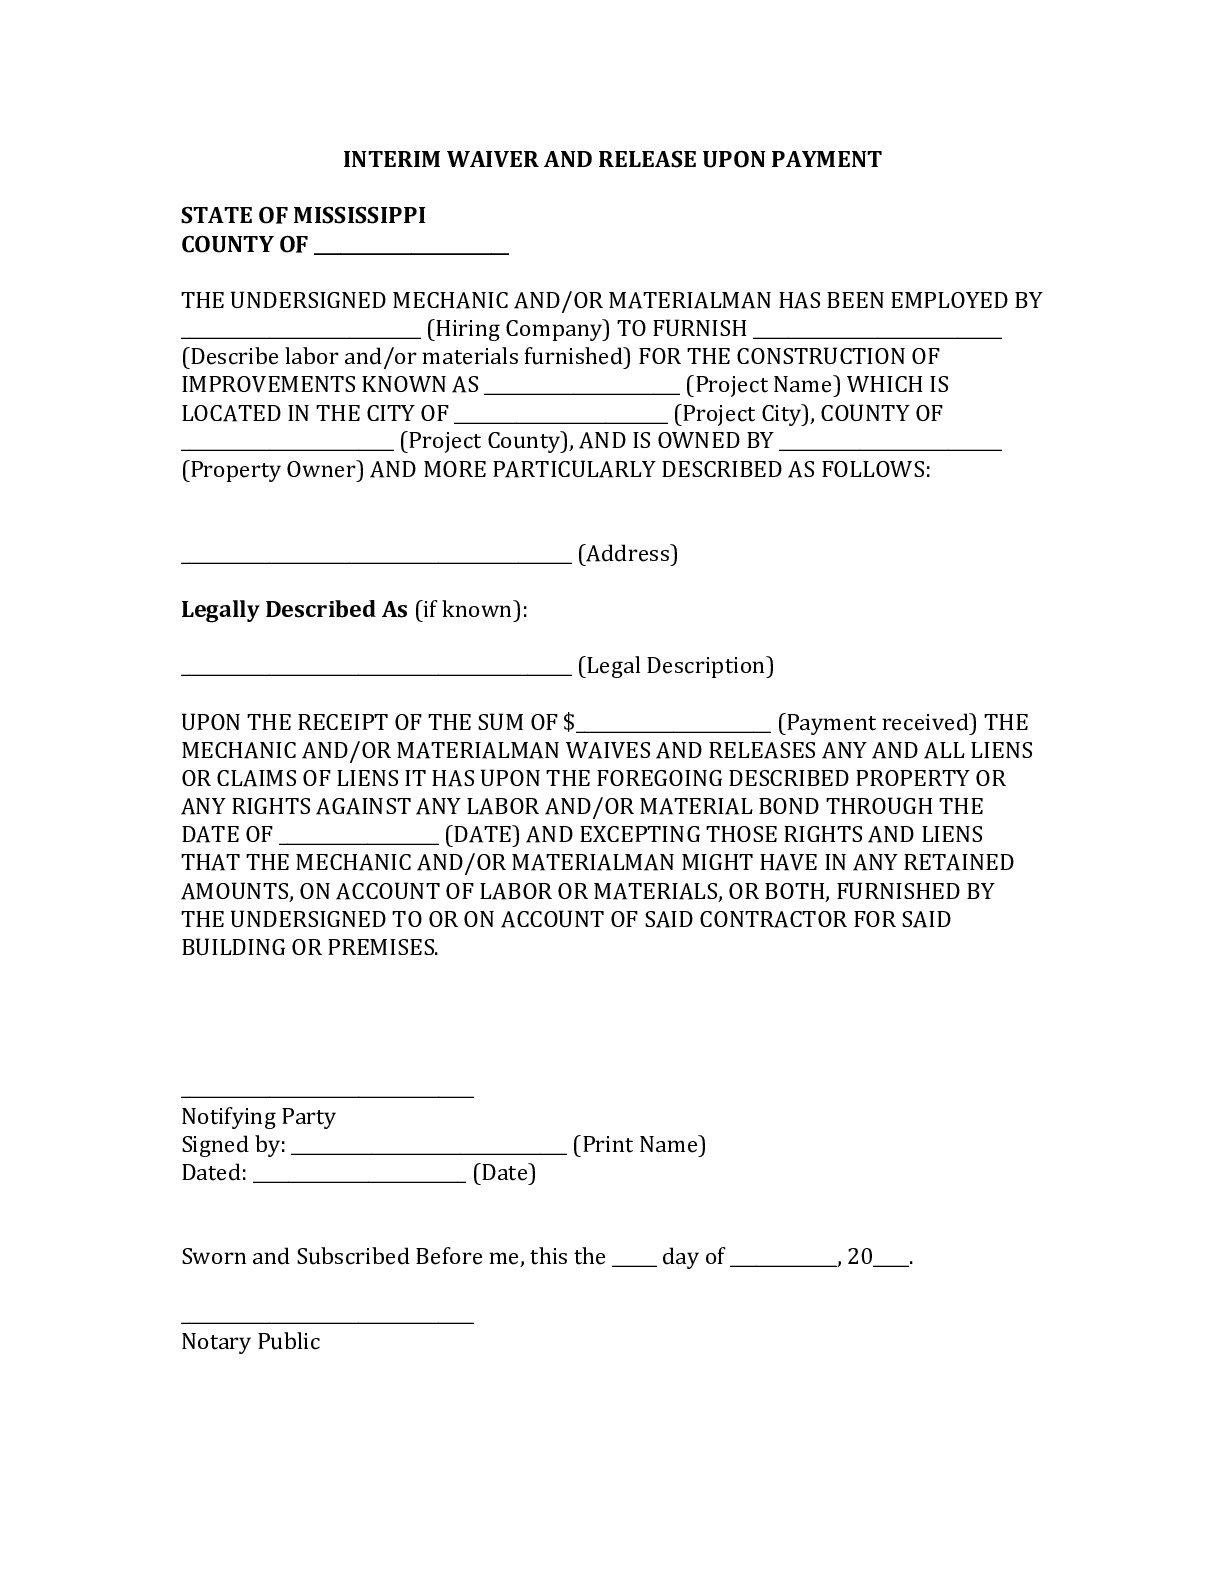 Mississippi Interim Lien Waiver Form - free from